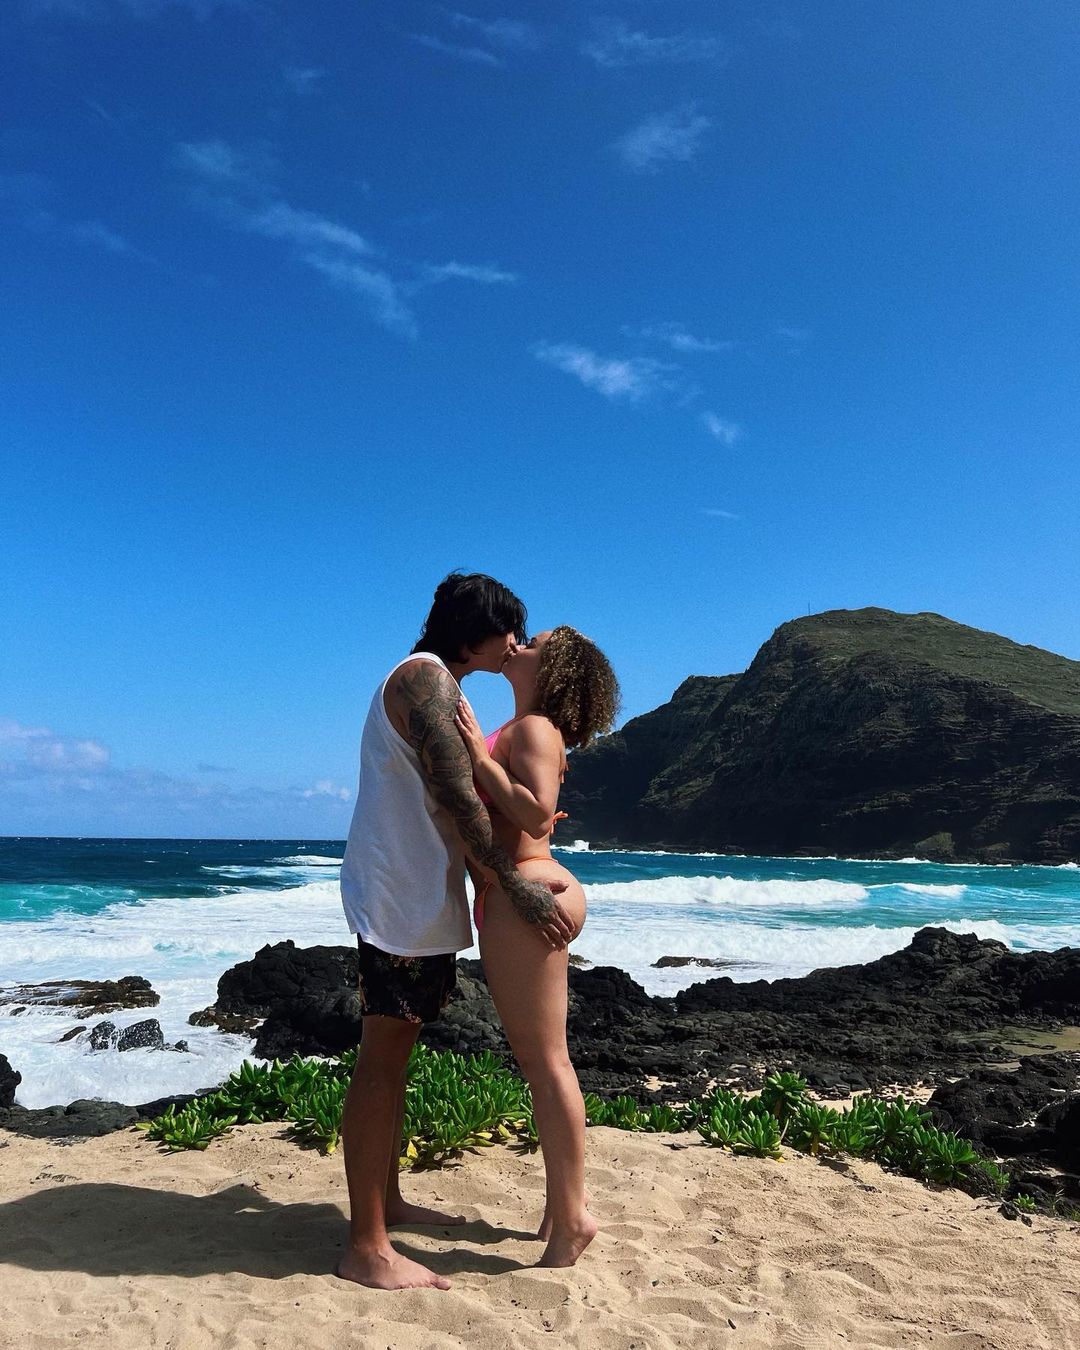 Brittany got engaged to her longtime boyfriend Steven in February of last year